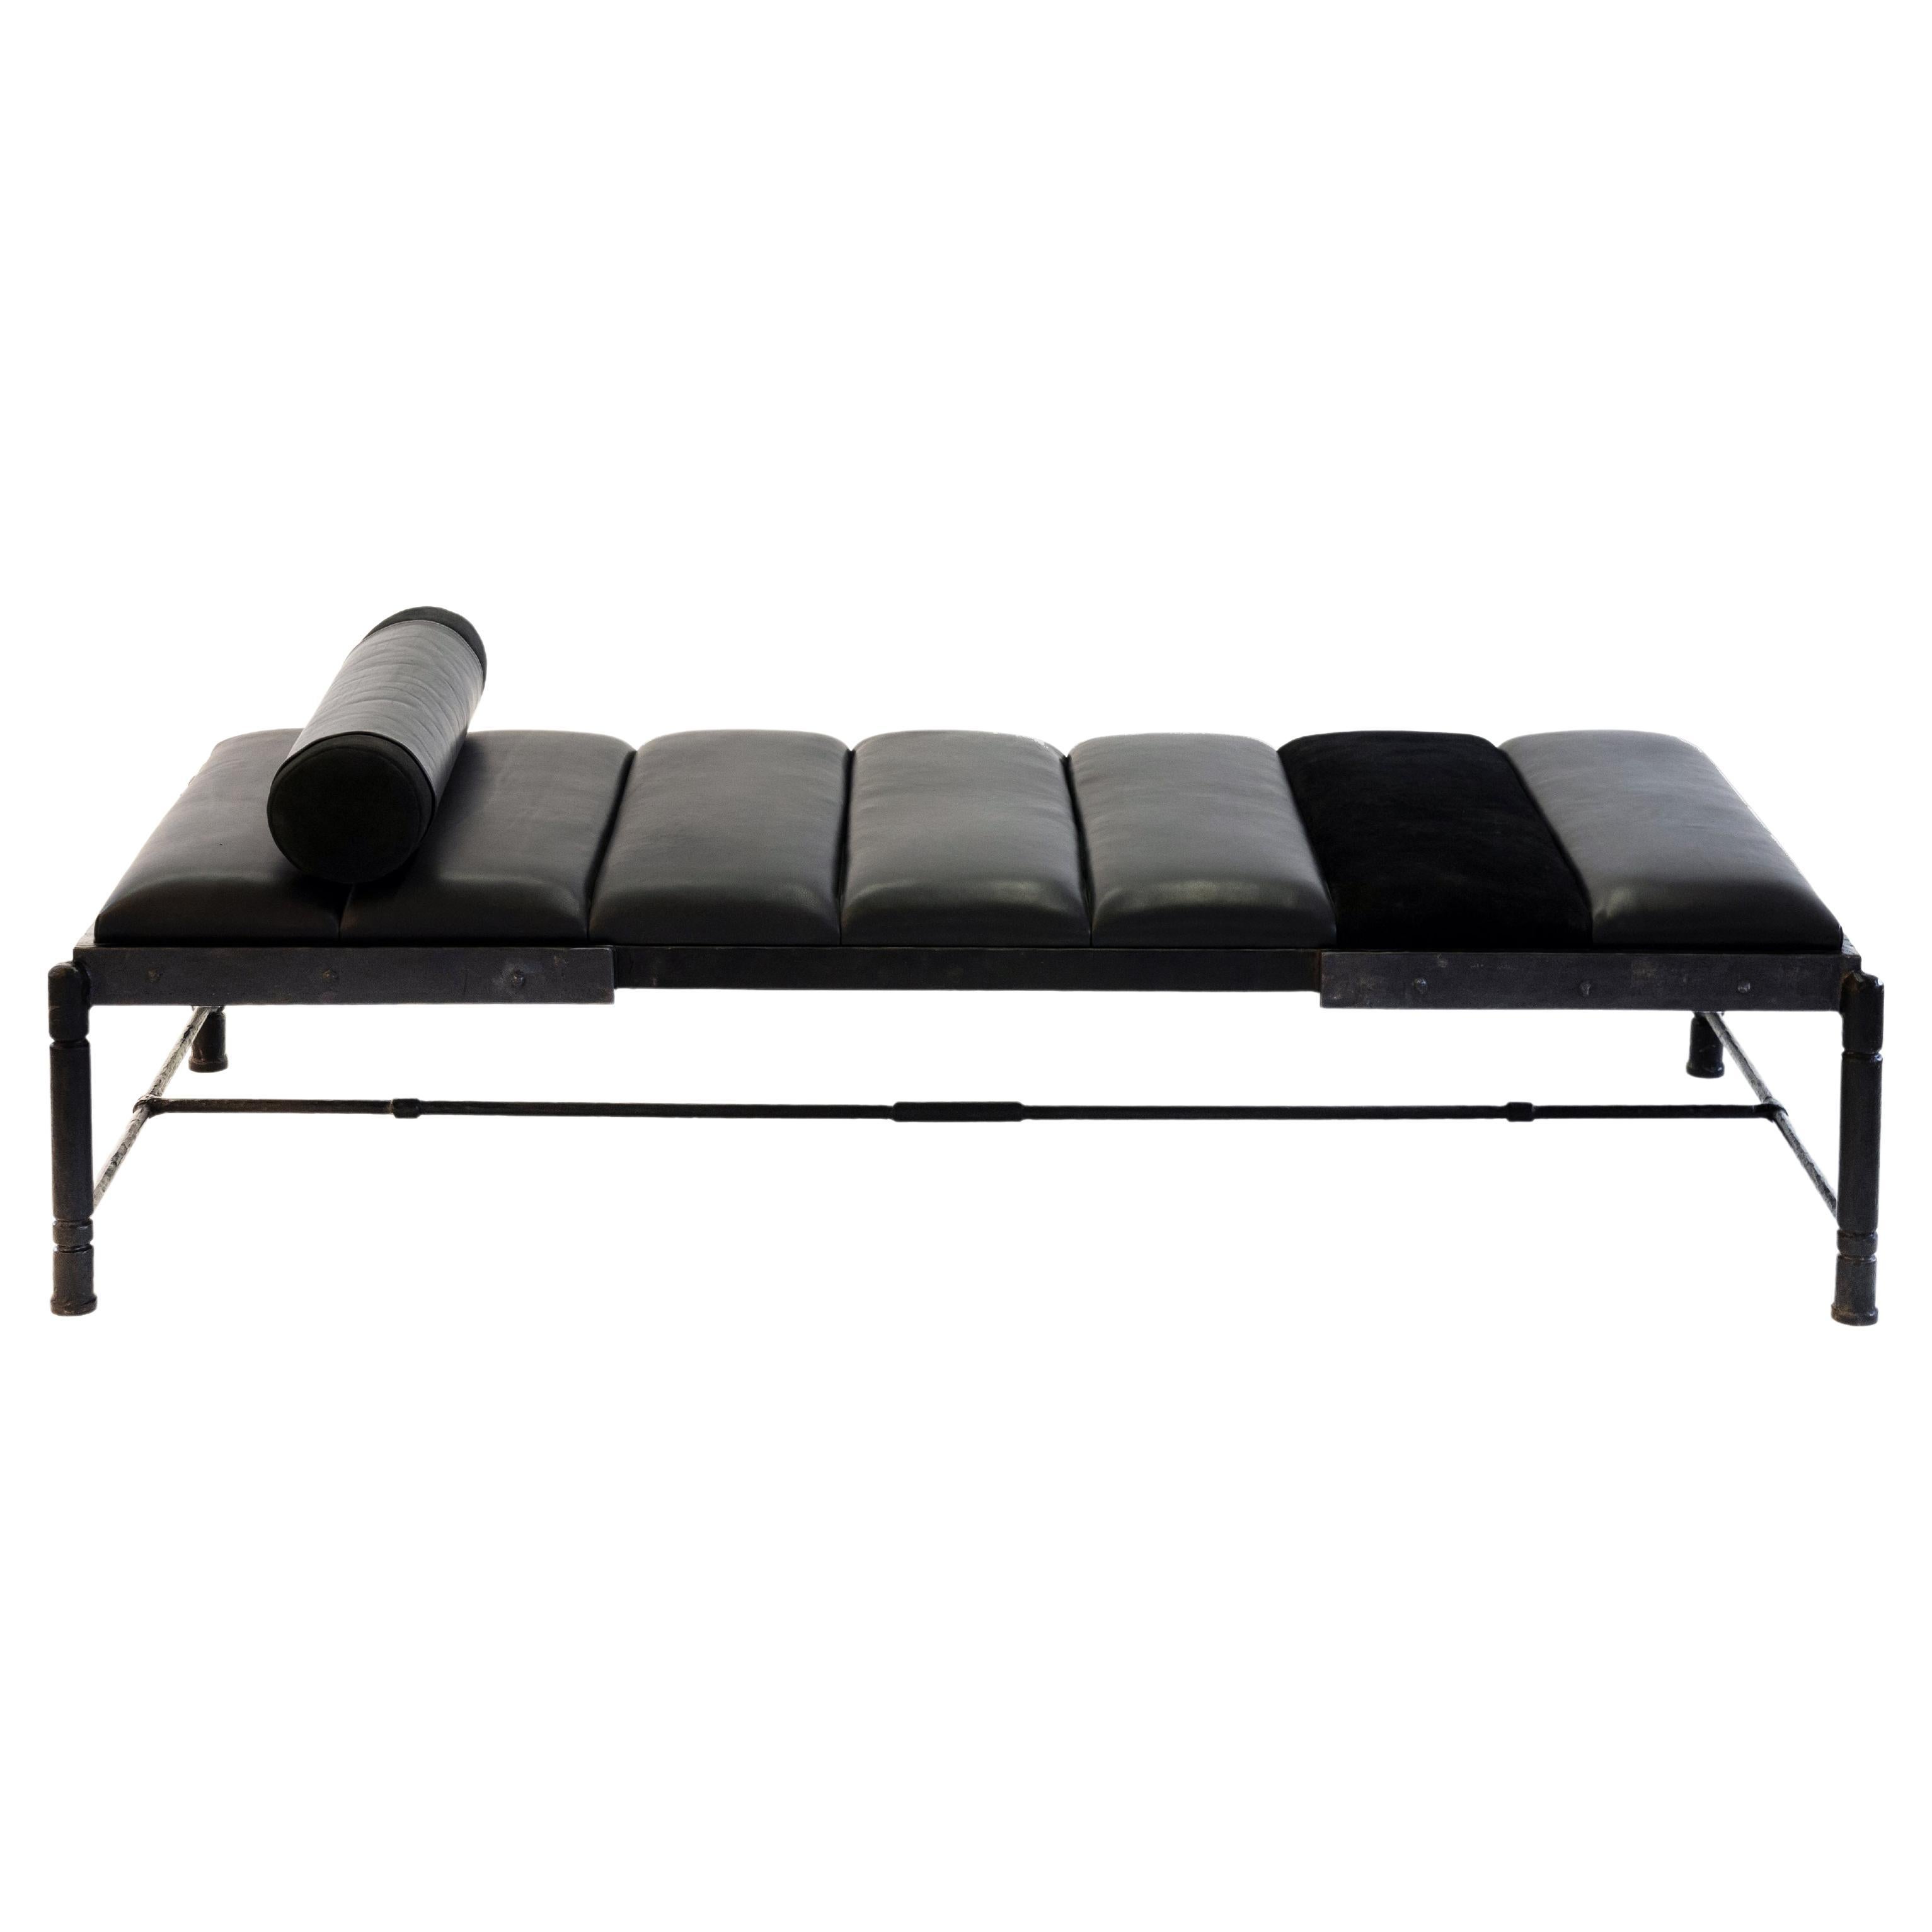 Bench/Daybed Modern/Handmade Black Leather Modern/Contemporary Waxed Steel For Sale